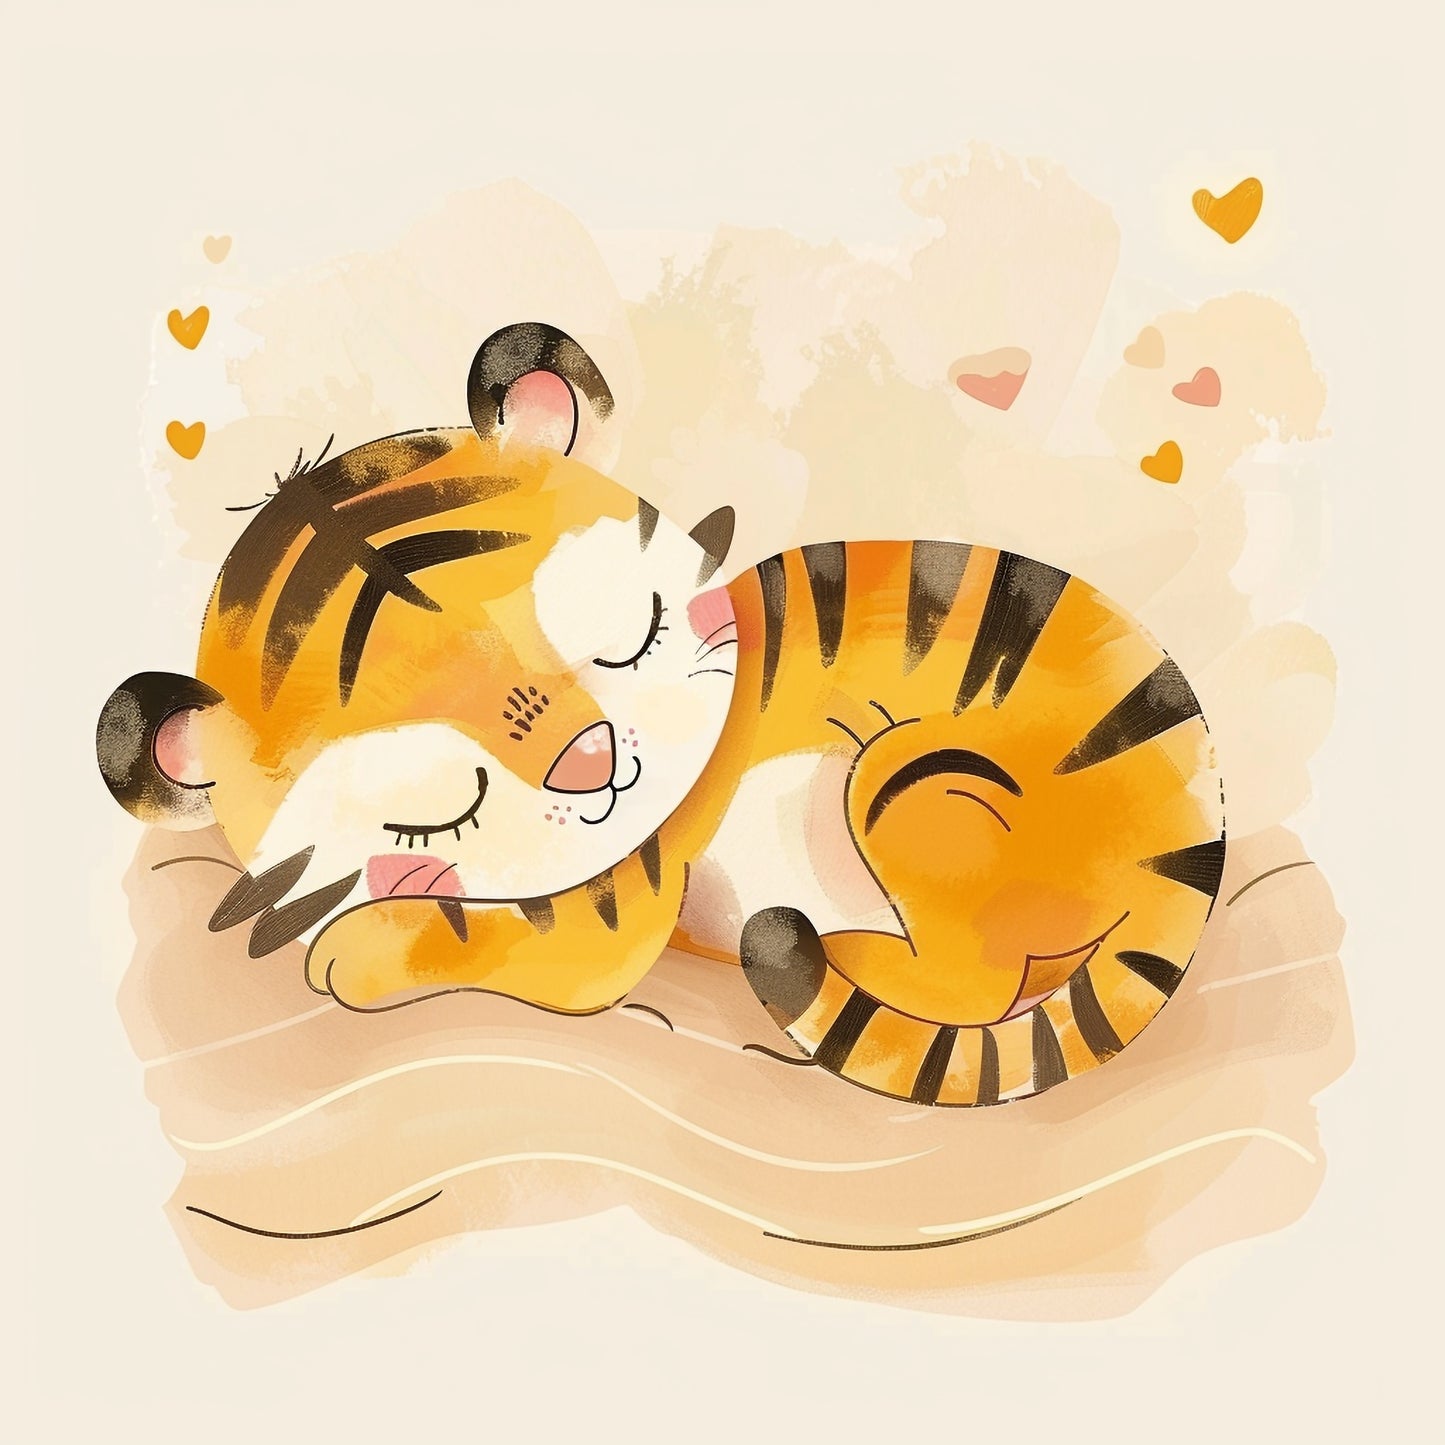 Adorable Baby Tiger Sleeping Peacefully with Heartful Bliss